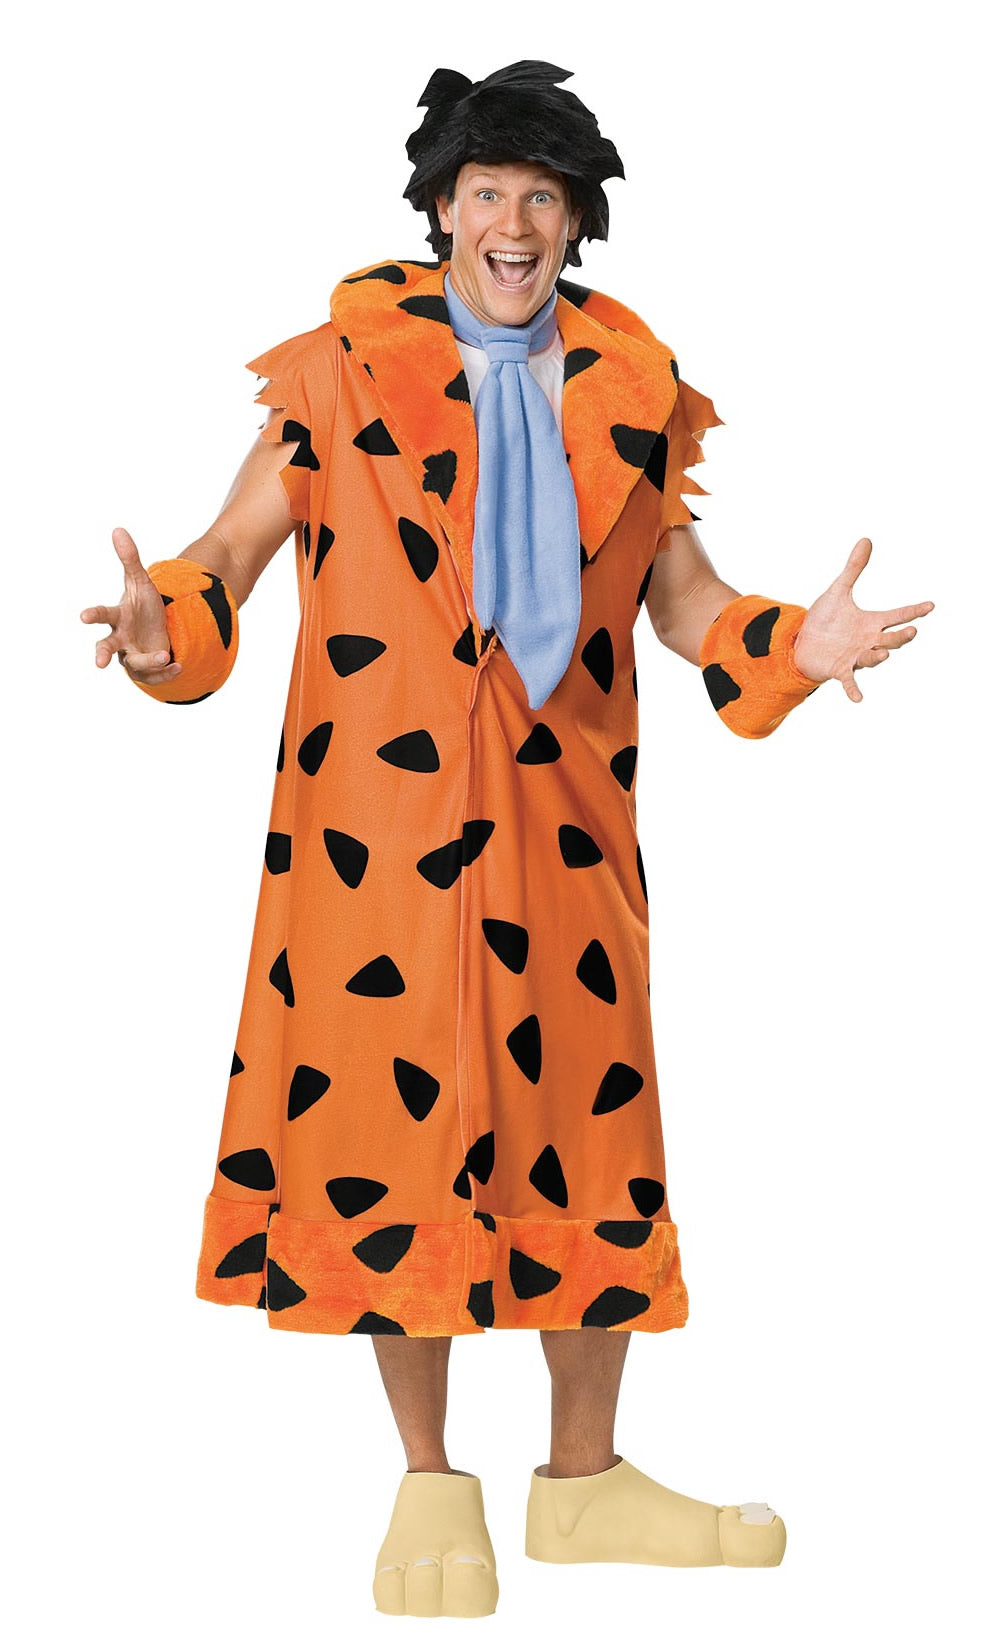 Orange Fred Flintstone costume with wig, wrist cuffs and feet shoe covers